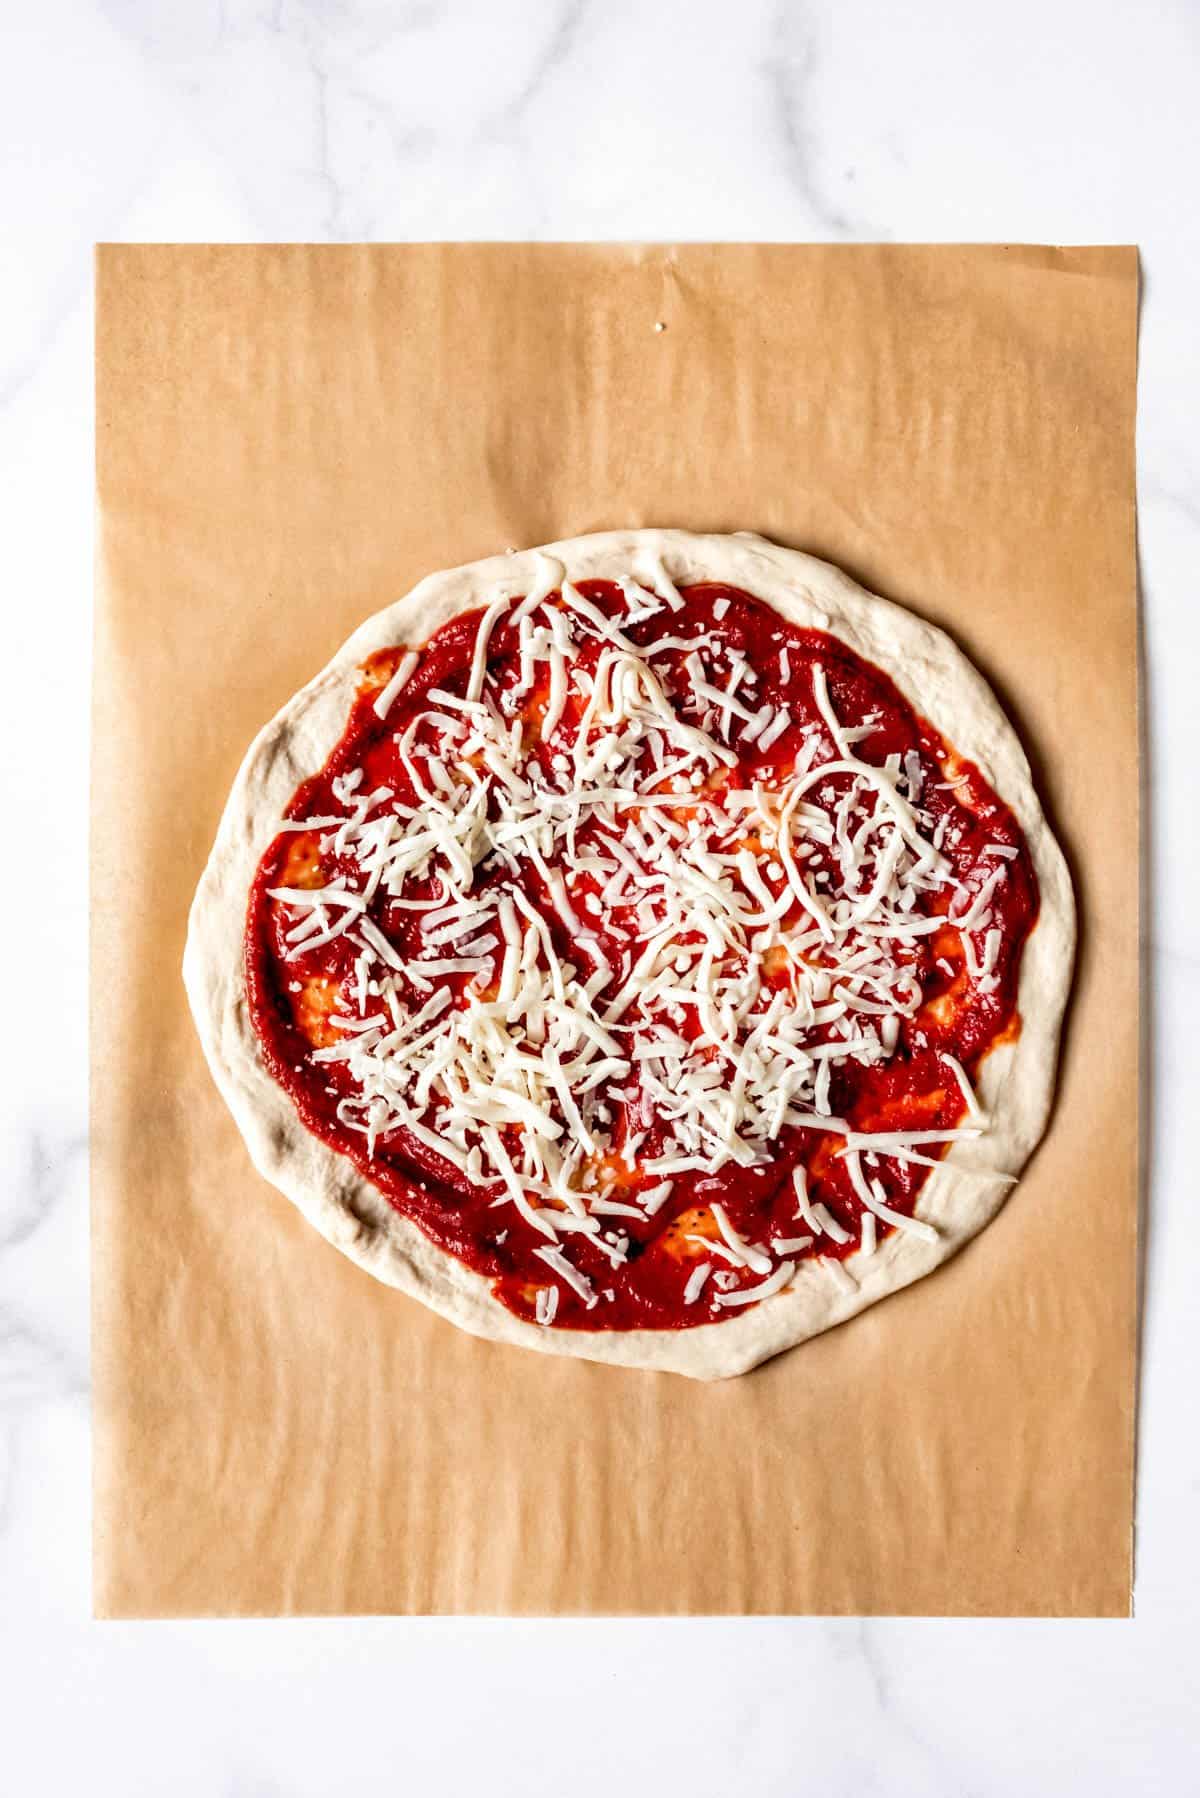 Sprinkling grated mozzarella cheese onto a pizza topped with sauce.